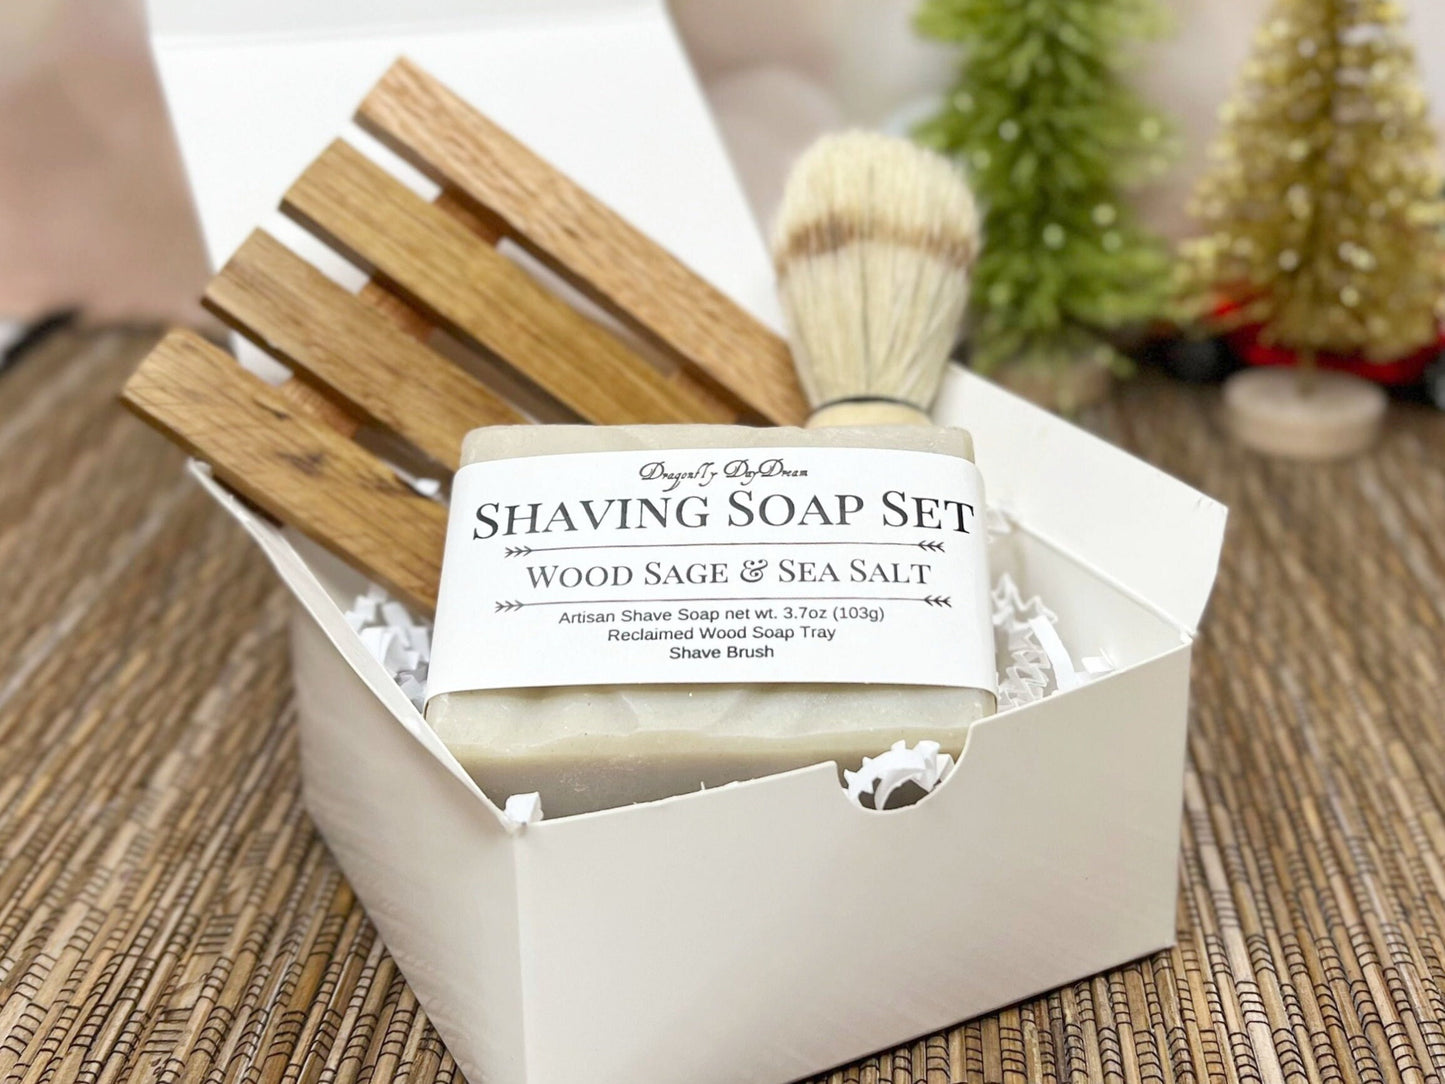 White gift box with one bar of wood sage & Sea salt shave soap, along with a reclaimed wood soap tray and shaving brush.  Gift box is sitting on a straw mat on a countertop with glittery green and gold trees in background